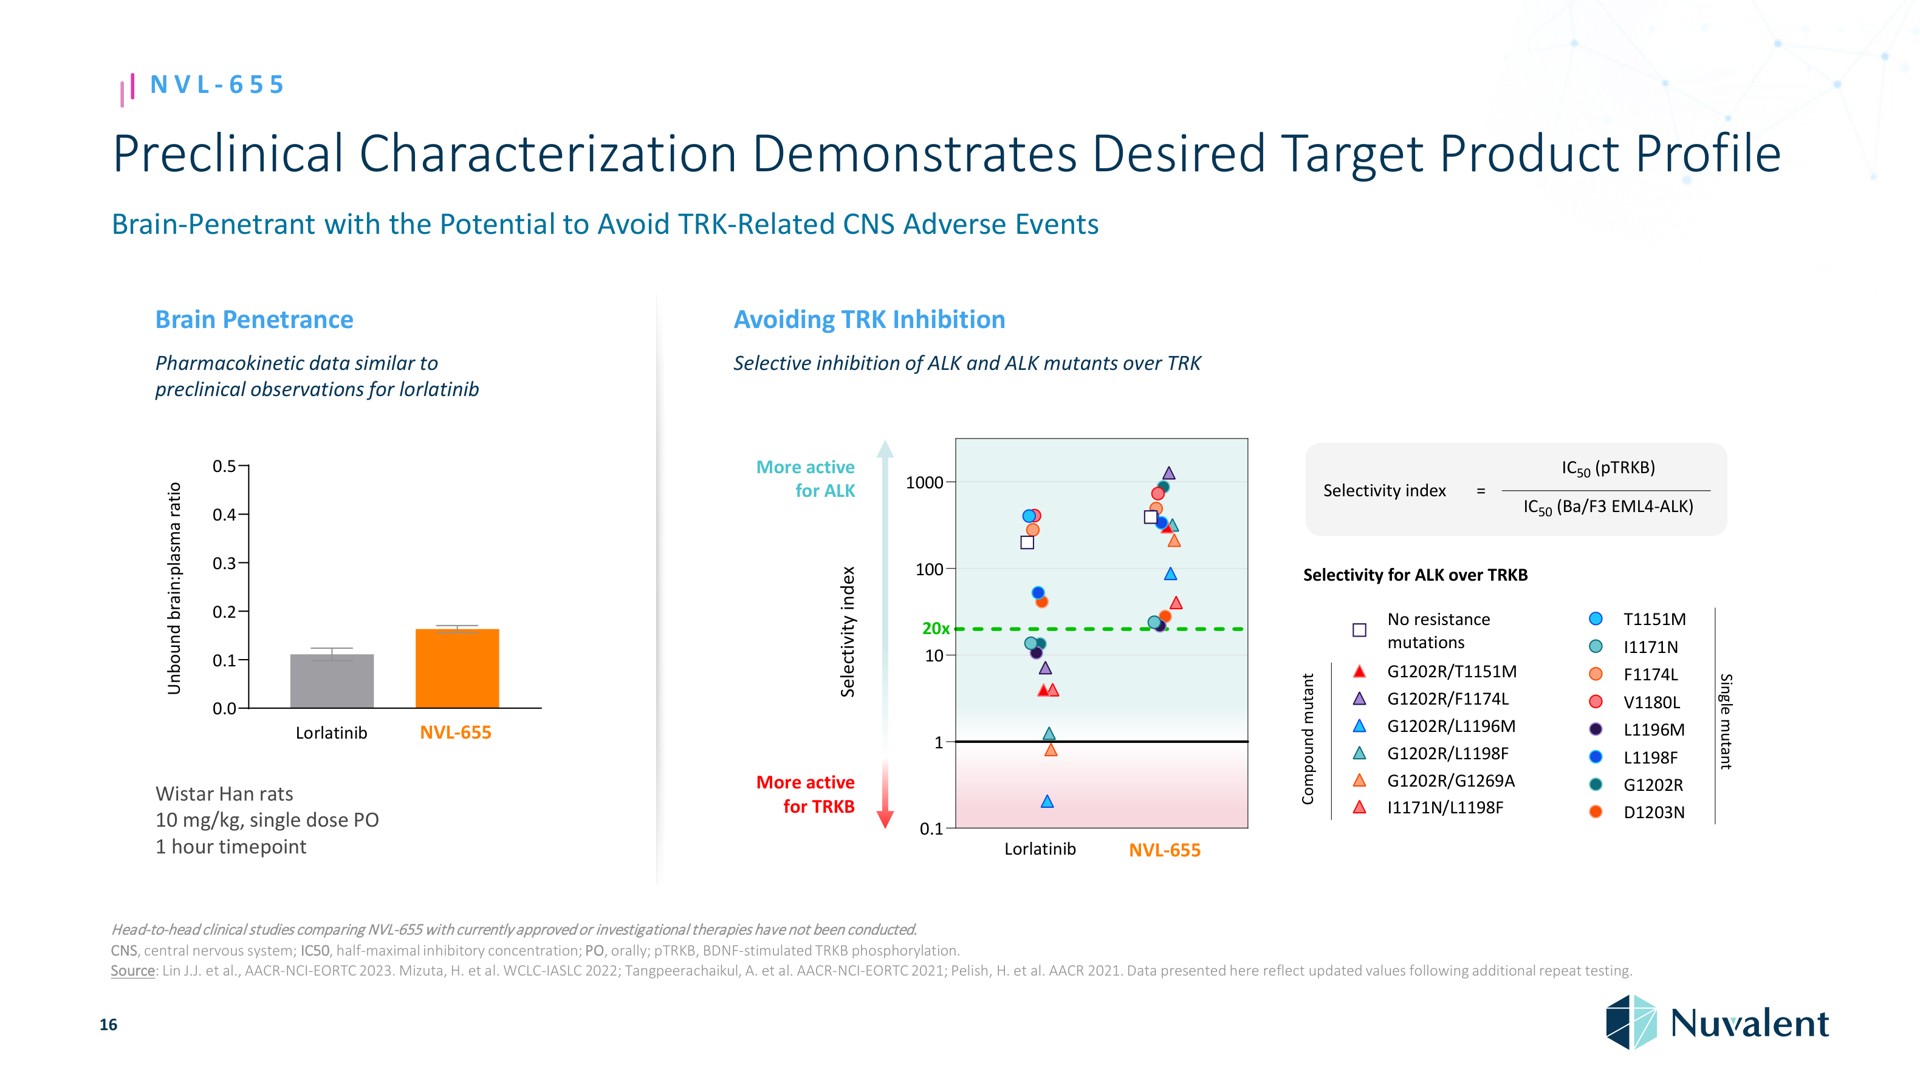 preclinical characterization demonstrates desired target product profile brain penetrant with the potential to avoid related adverse events brain penetrance avoiding inhibition data similar to observations for selective inhibition of alk and alk mutants over i a a a i a han rats single dose hour more active for alk a a a a a a me a more active for a selectivity index alk selectivity for alk over no resistance mutations a a a head to head clinical studies comparing with currently approved or investigational therapies have not been conducted central nervous system half maximal inhibitory concentration orally stimulated phosphorylation source lin a data presented here reflect updated values following additional repeat testing | Nuvalent